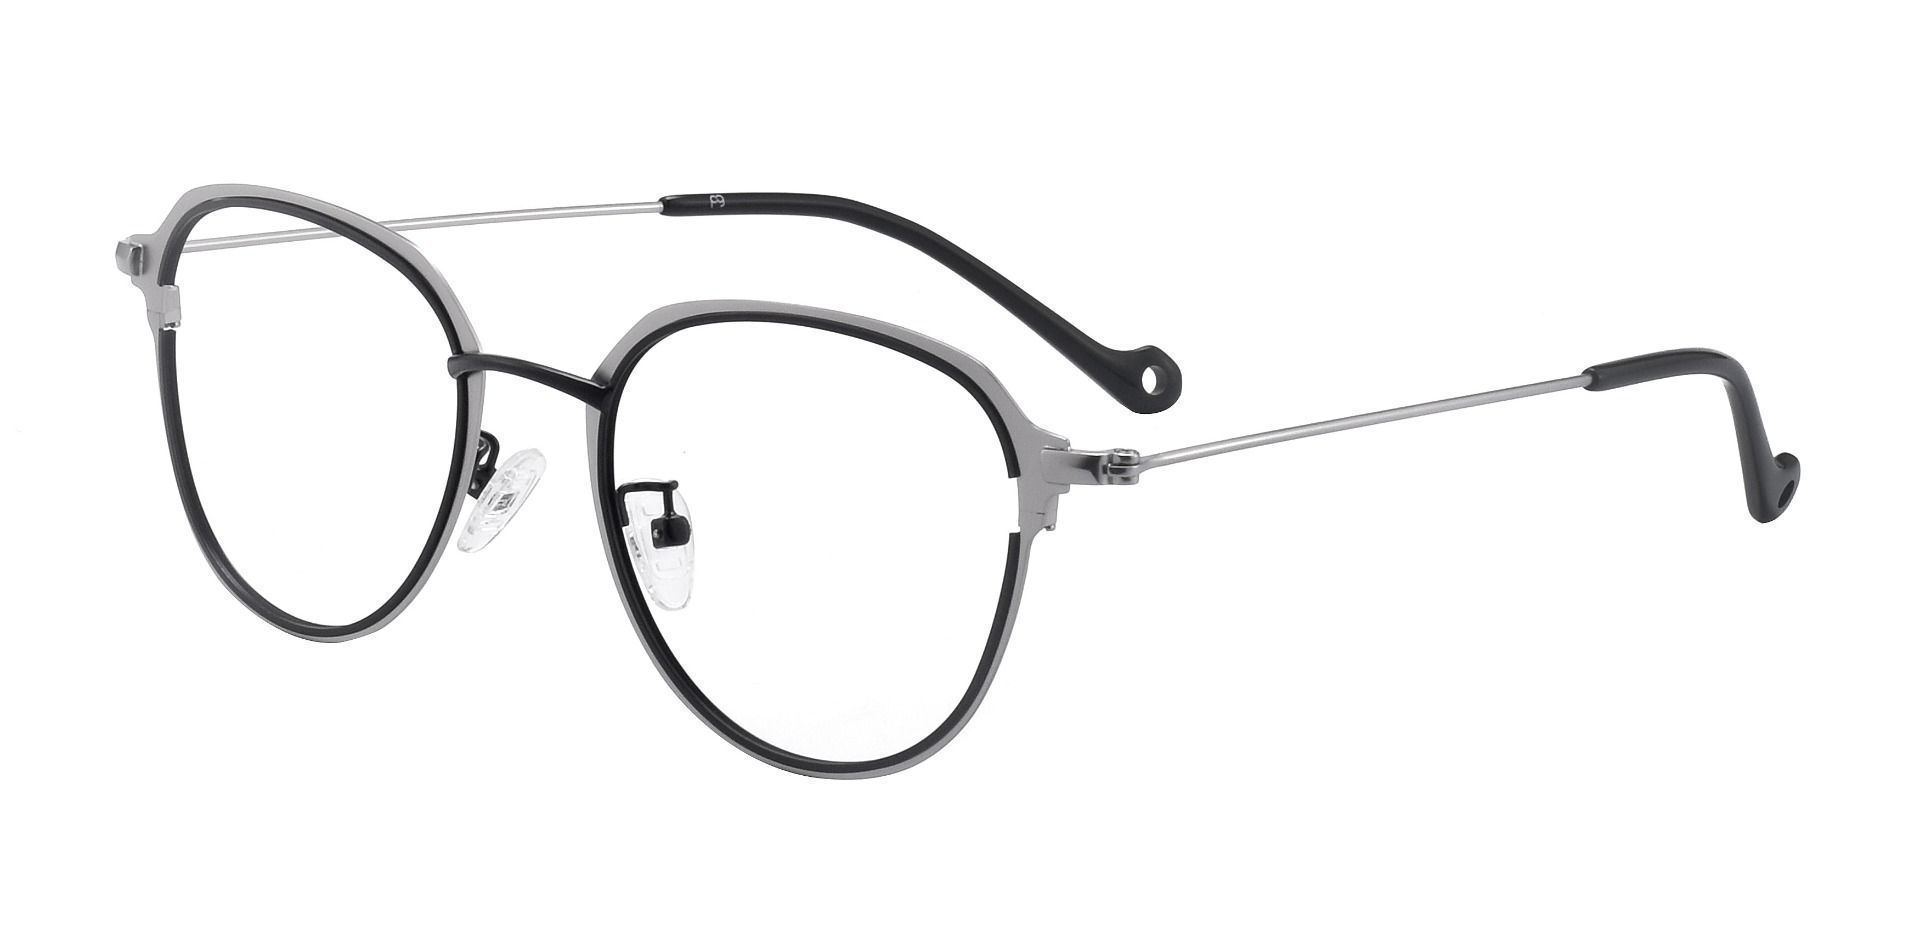 Murray Geometric Reading Glasses - The Frame Is Black And Silvery